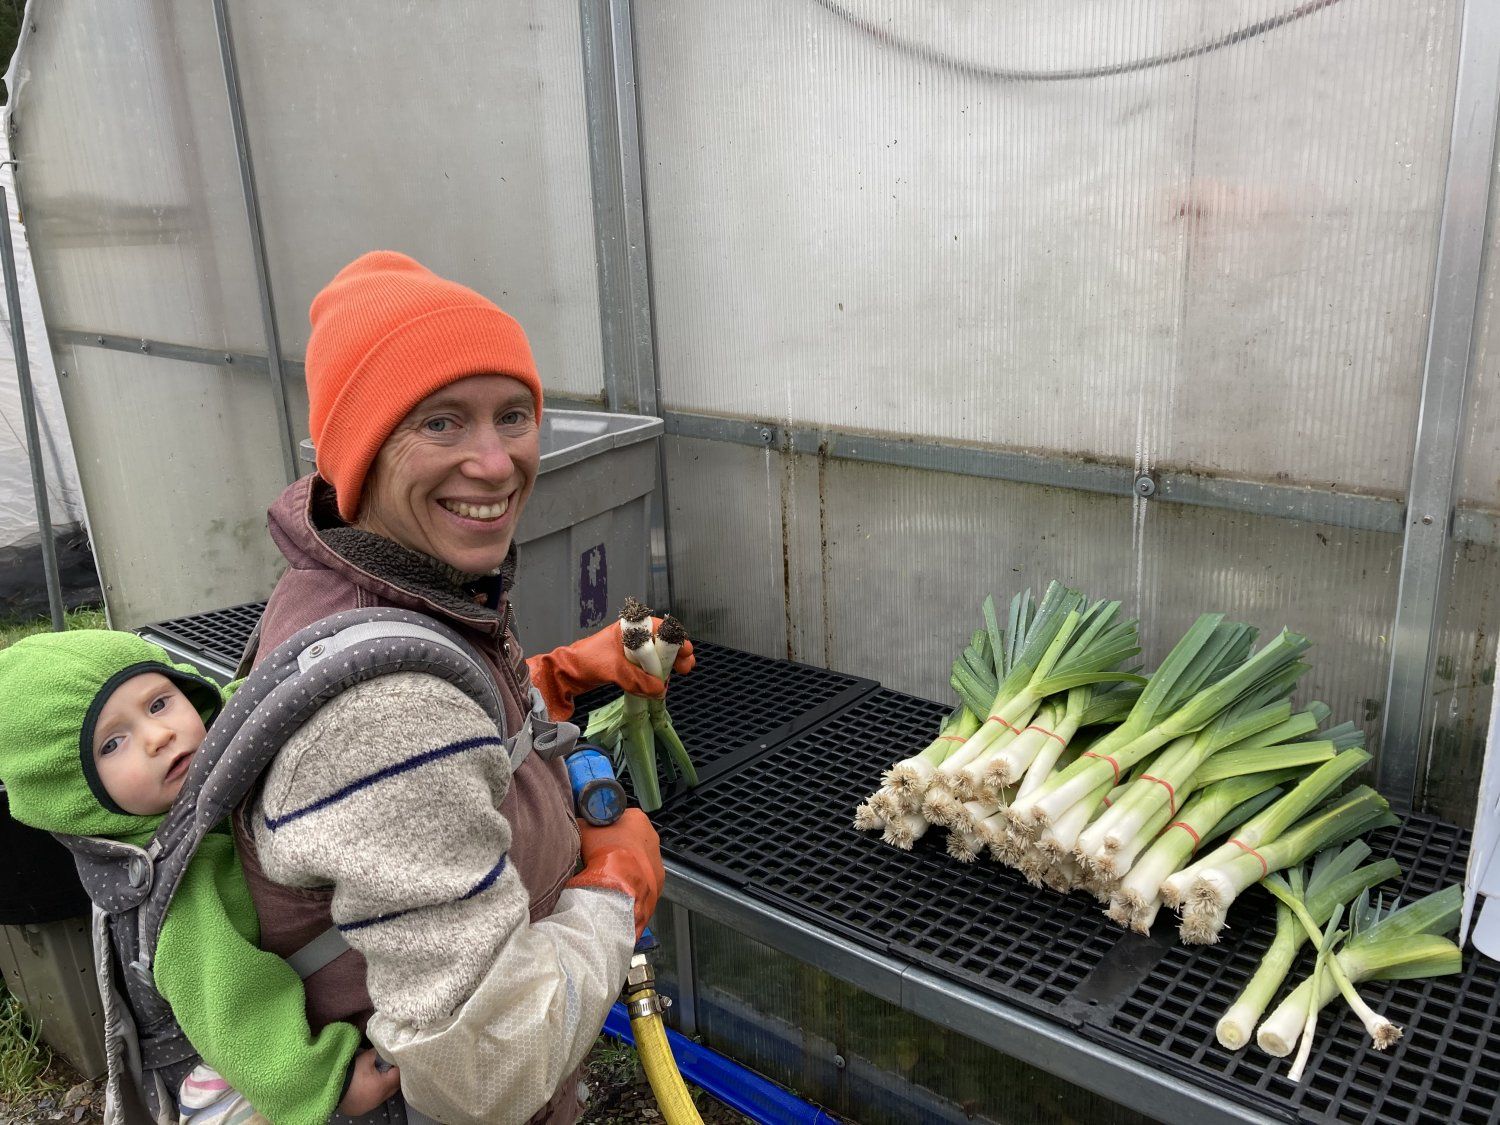 Next Happening: Don't Know Much About Leeks?